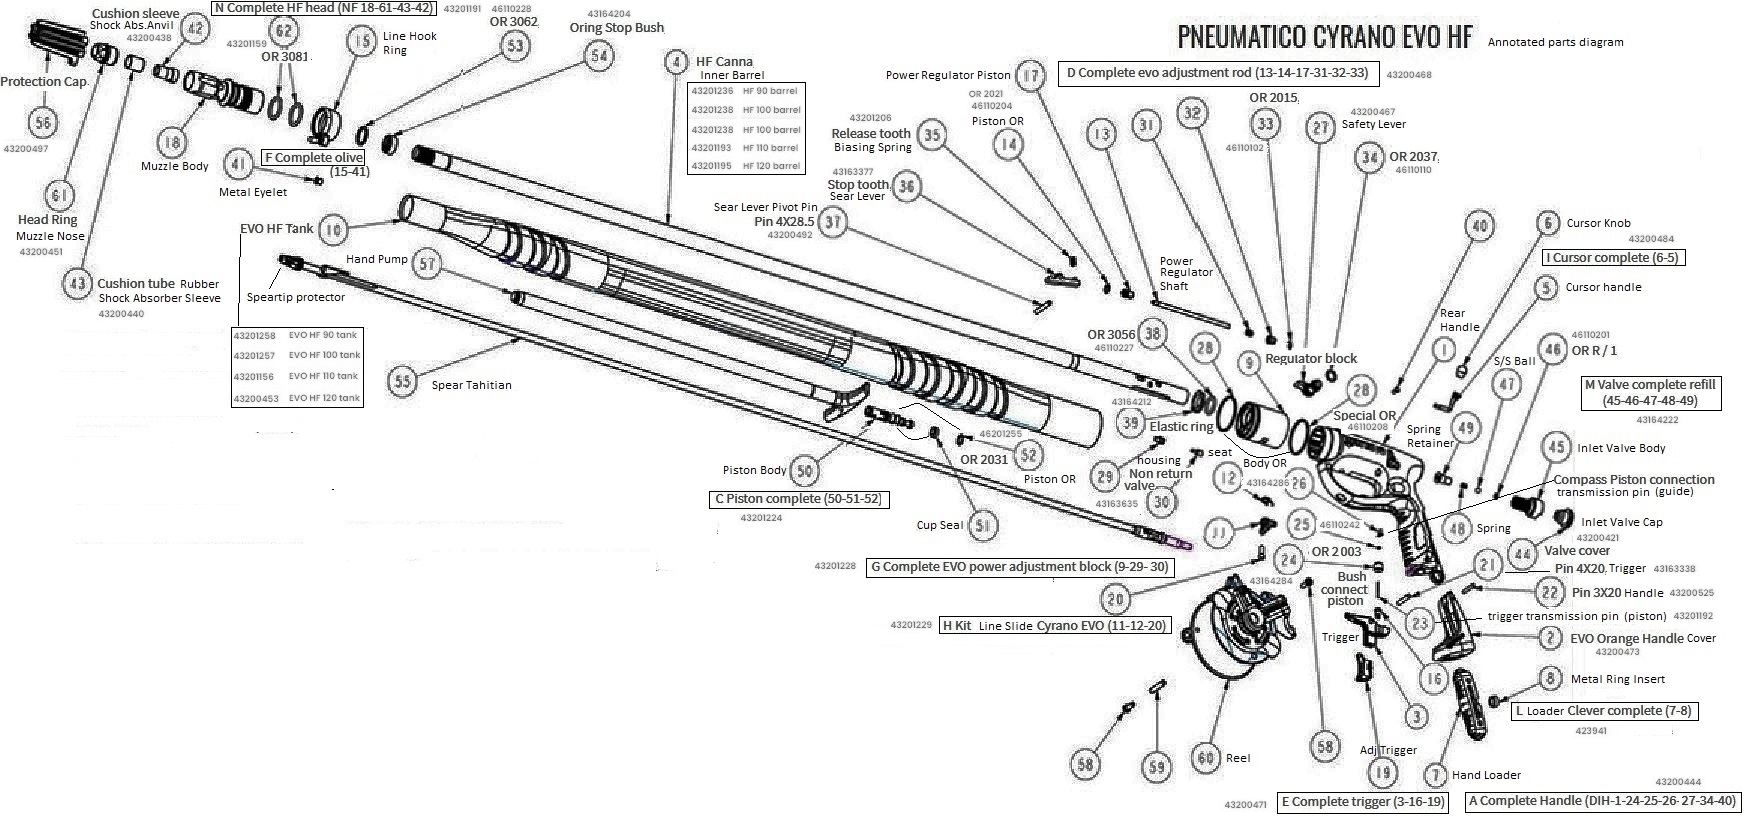 Cyrano Evo parts diagram annotated numbers.jpg